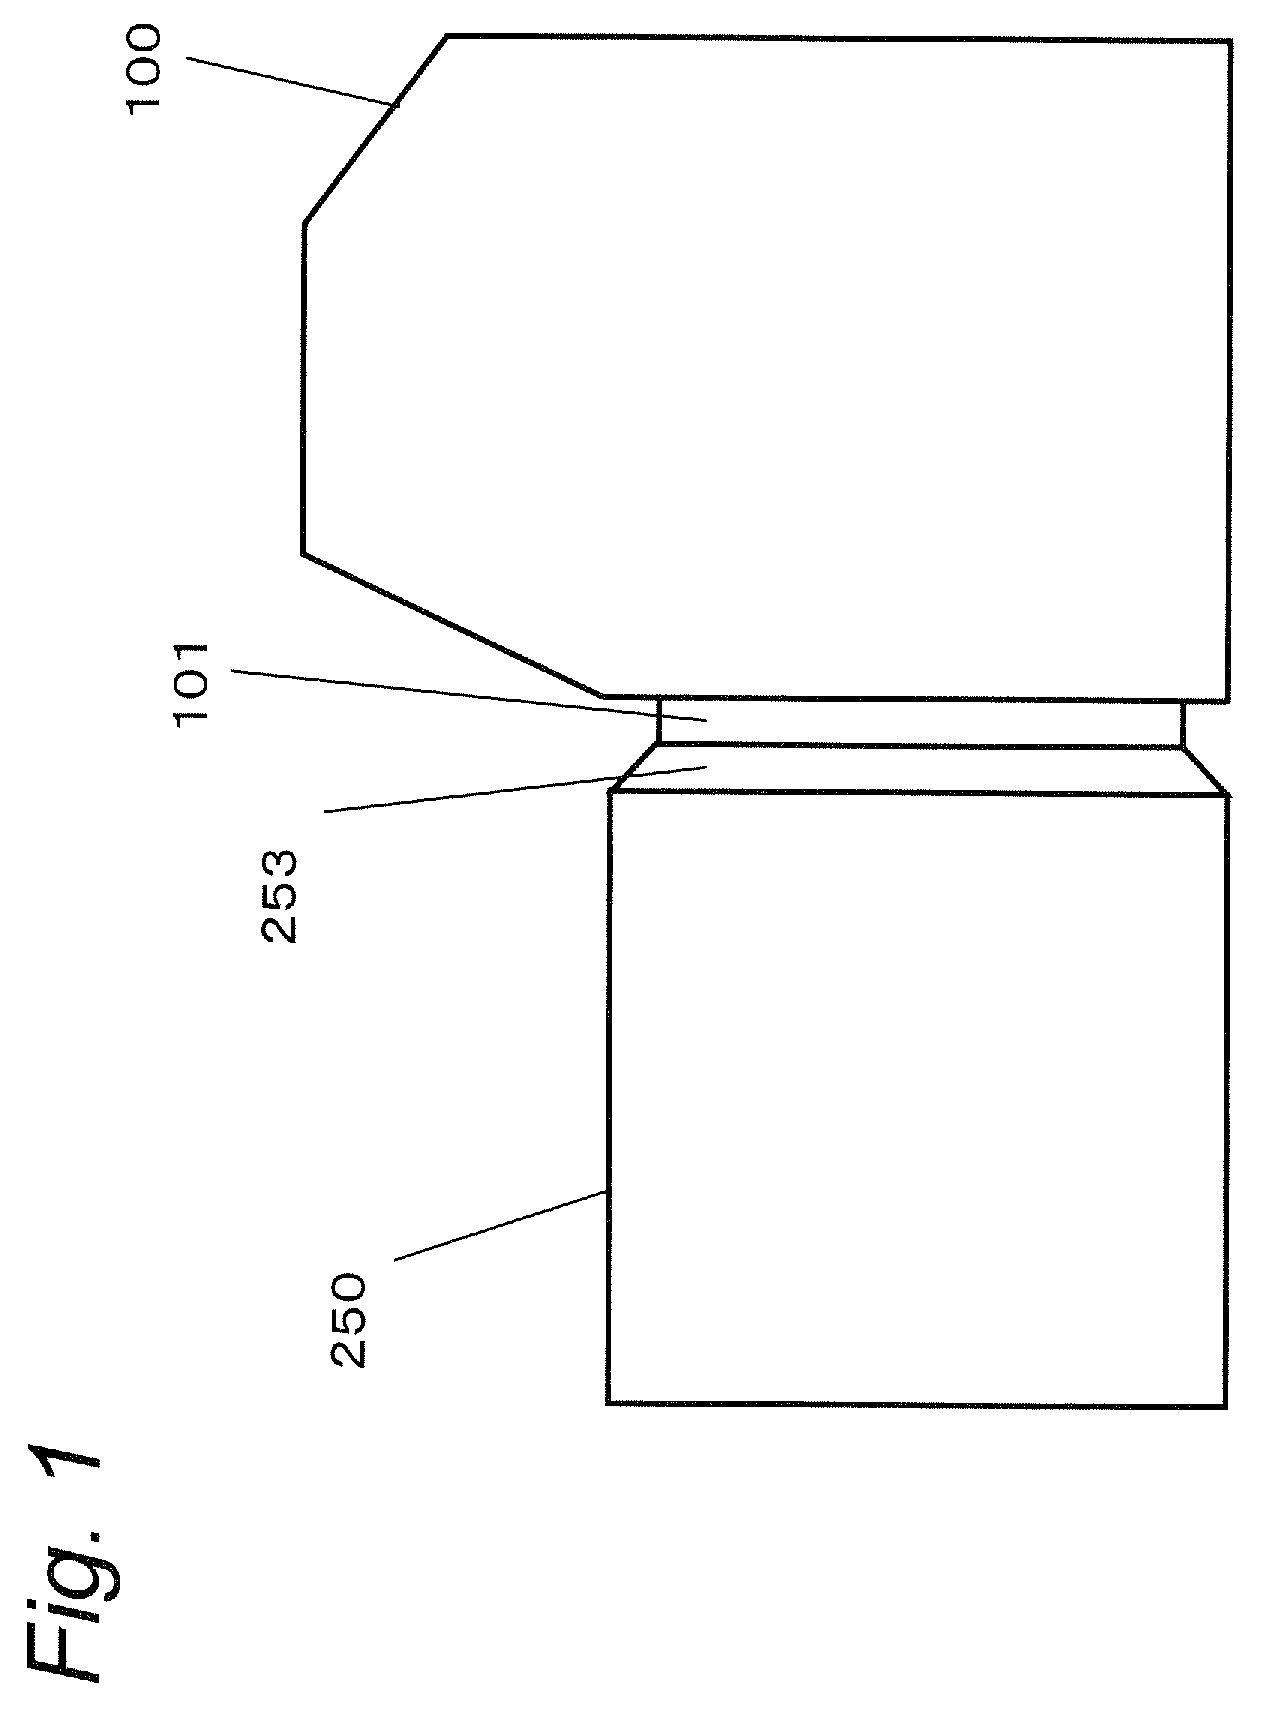 Intermediate adapter, camera body and imaging system